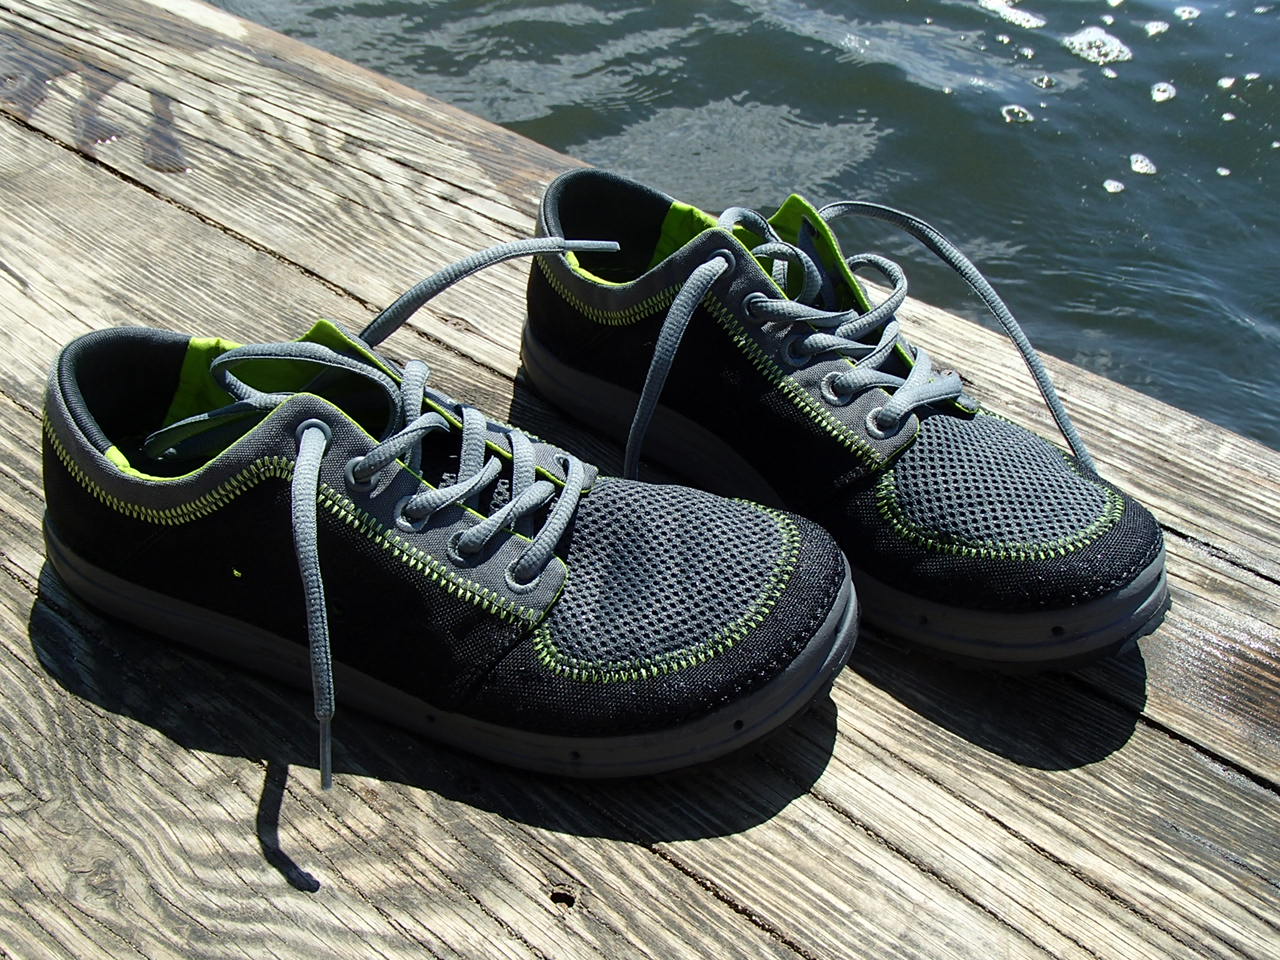 Astral Brewer Water Shoe Review Kayak Dave's